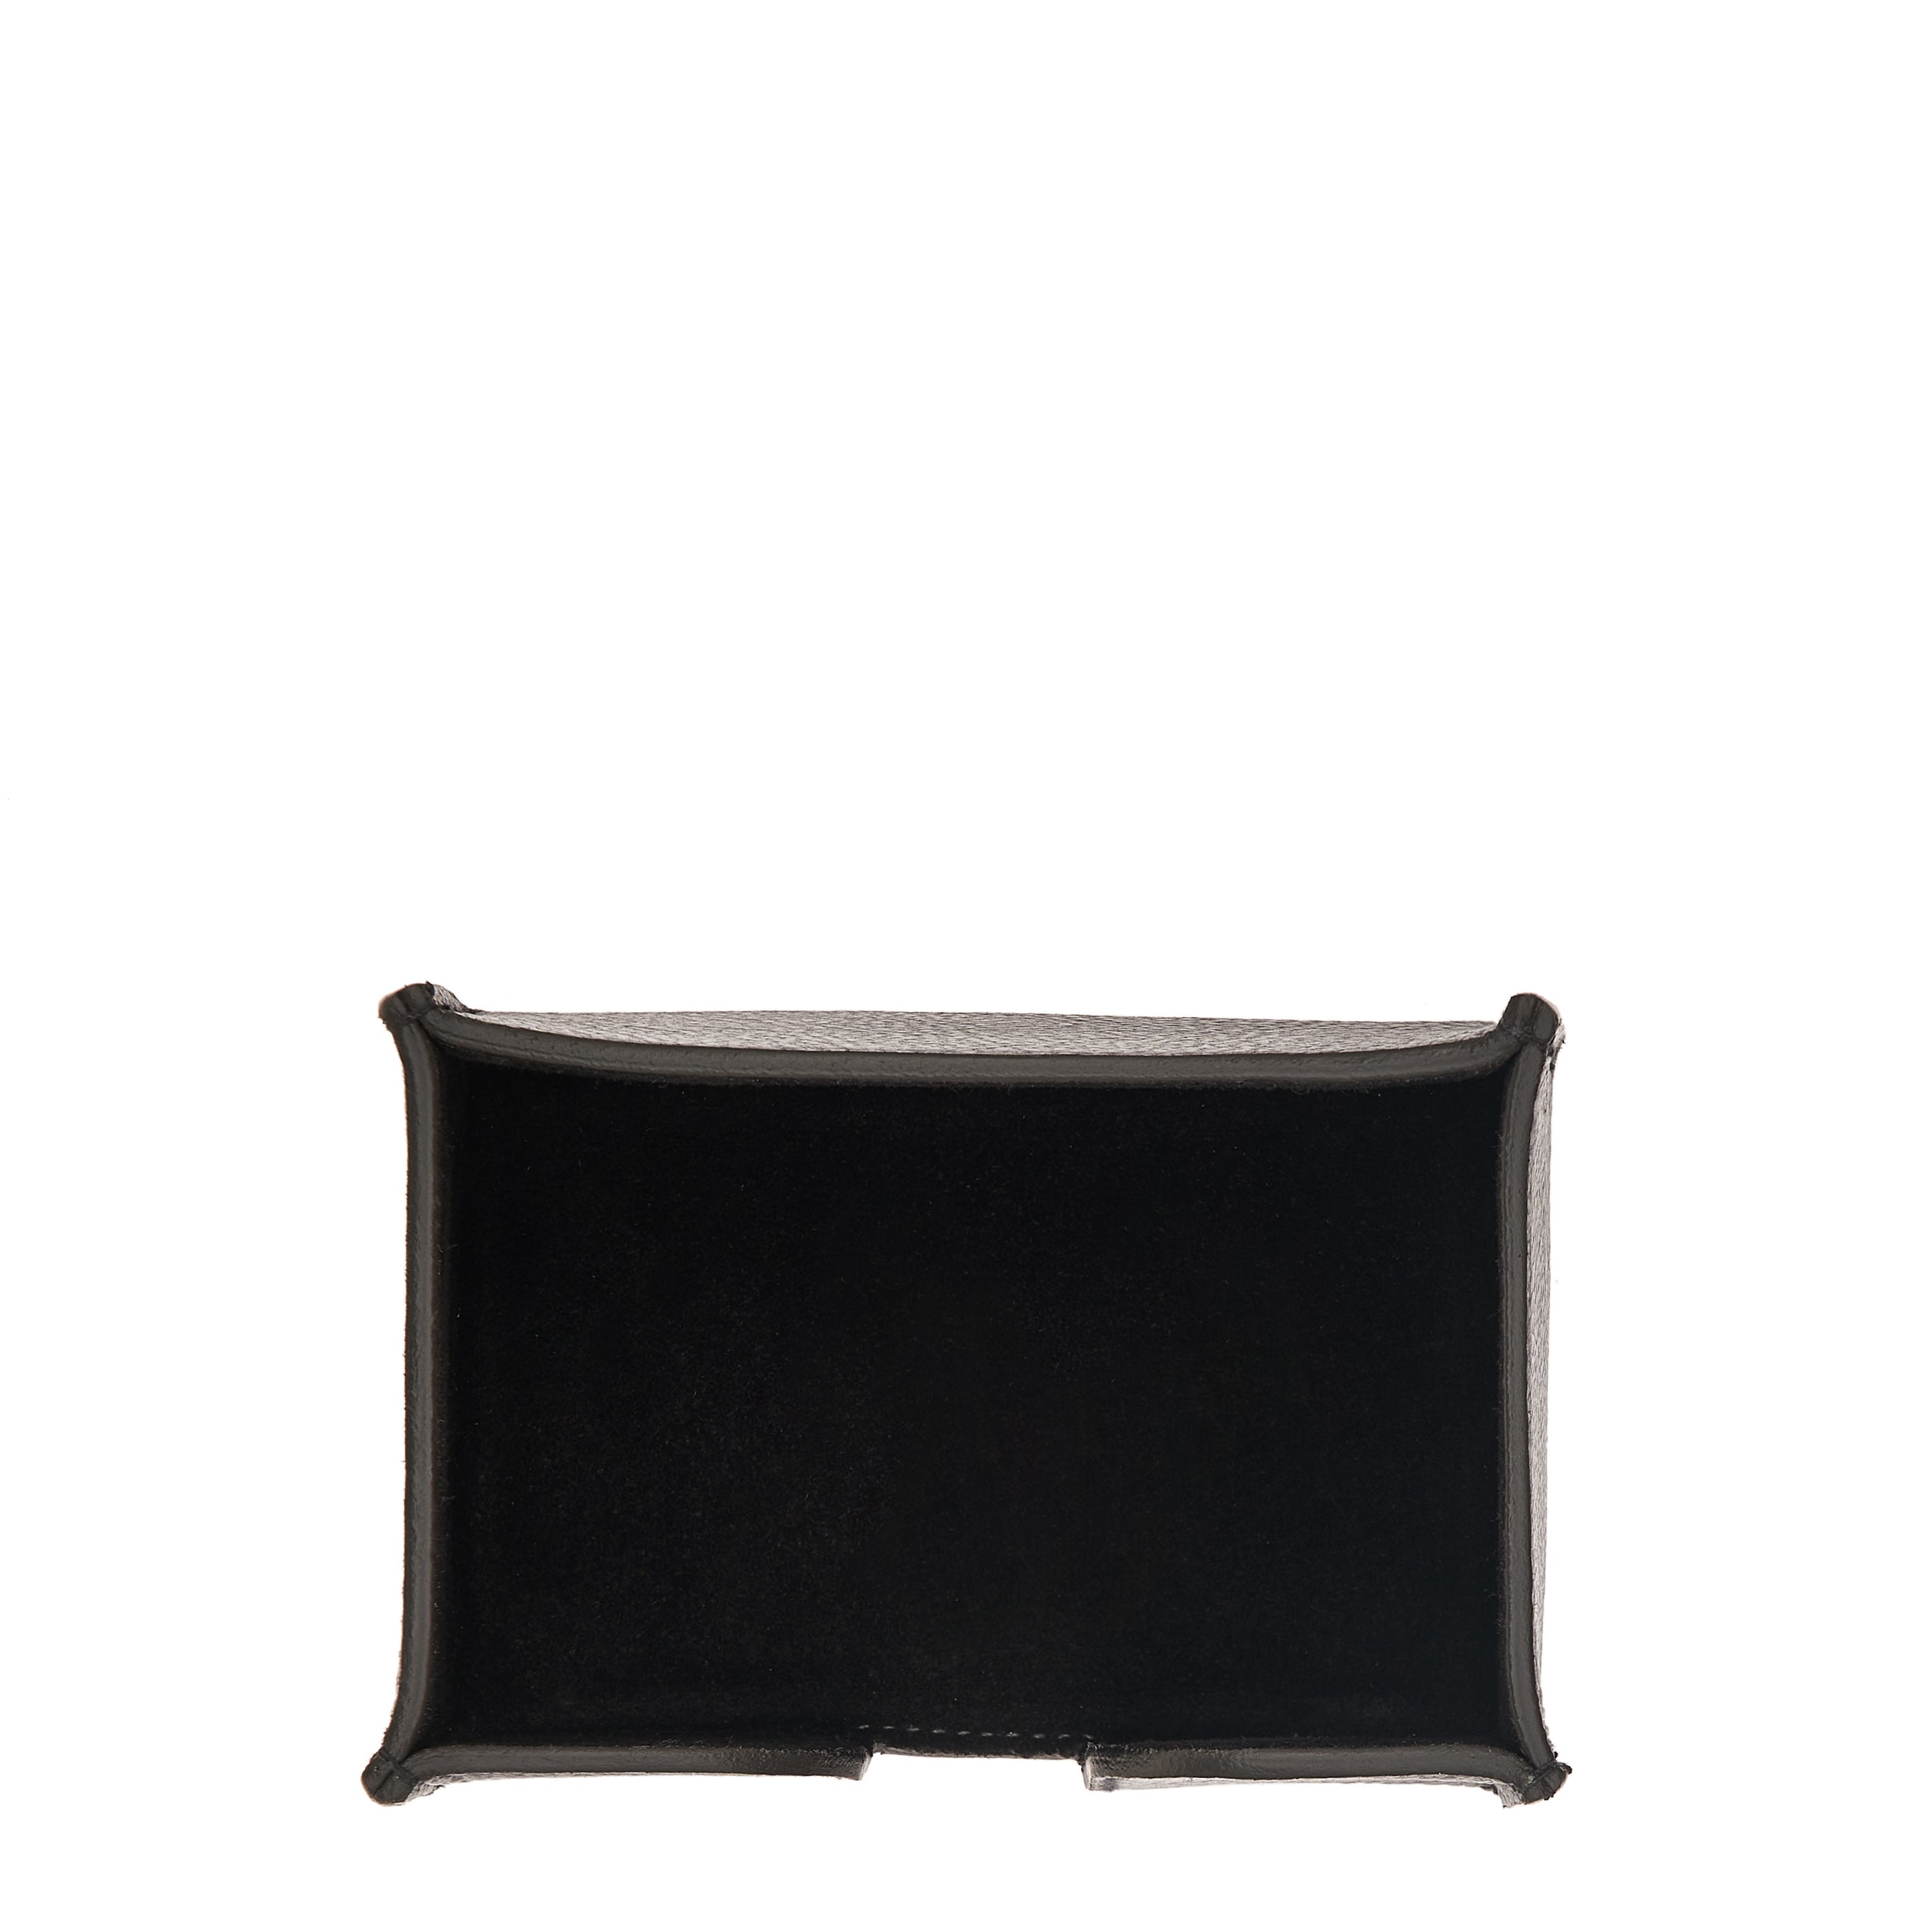 Office & business | Desk accessory in calf leather color black